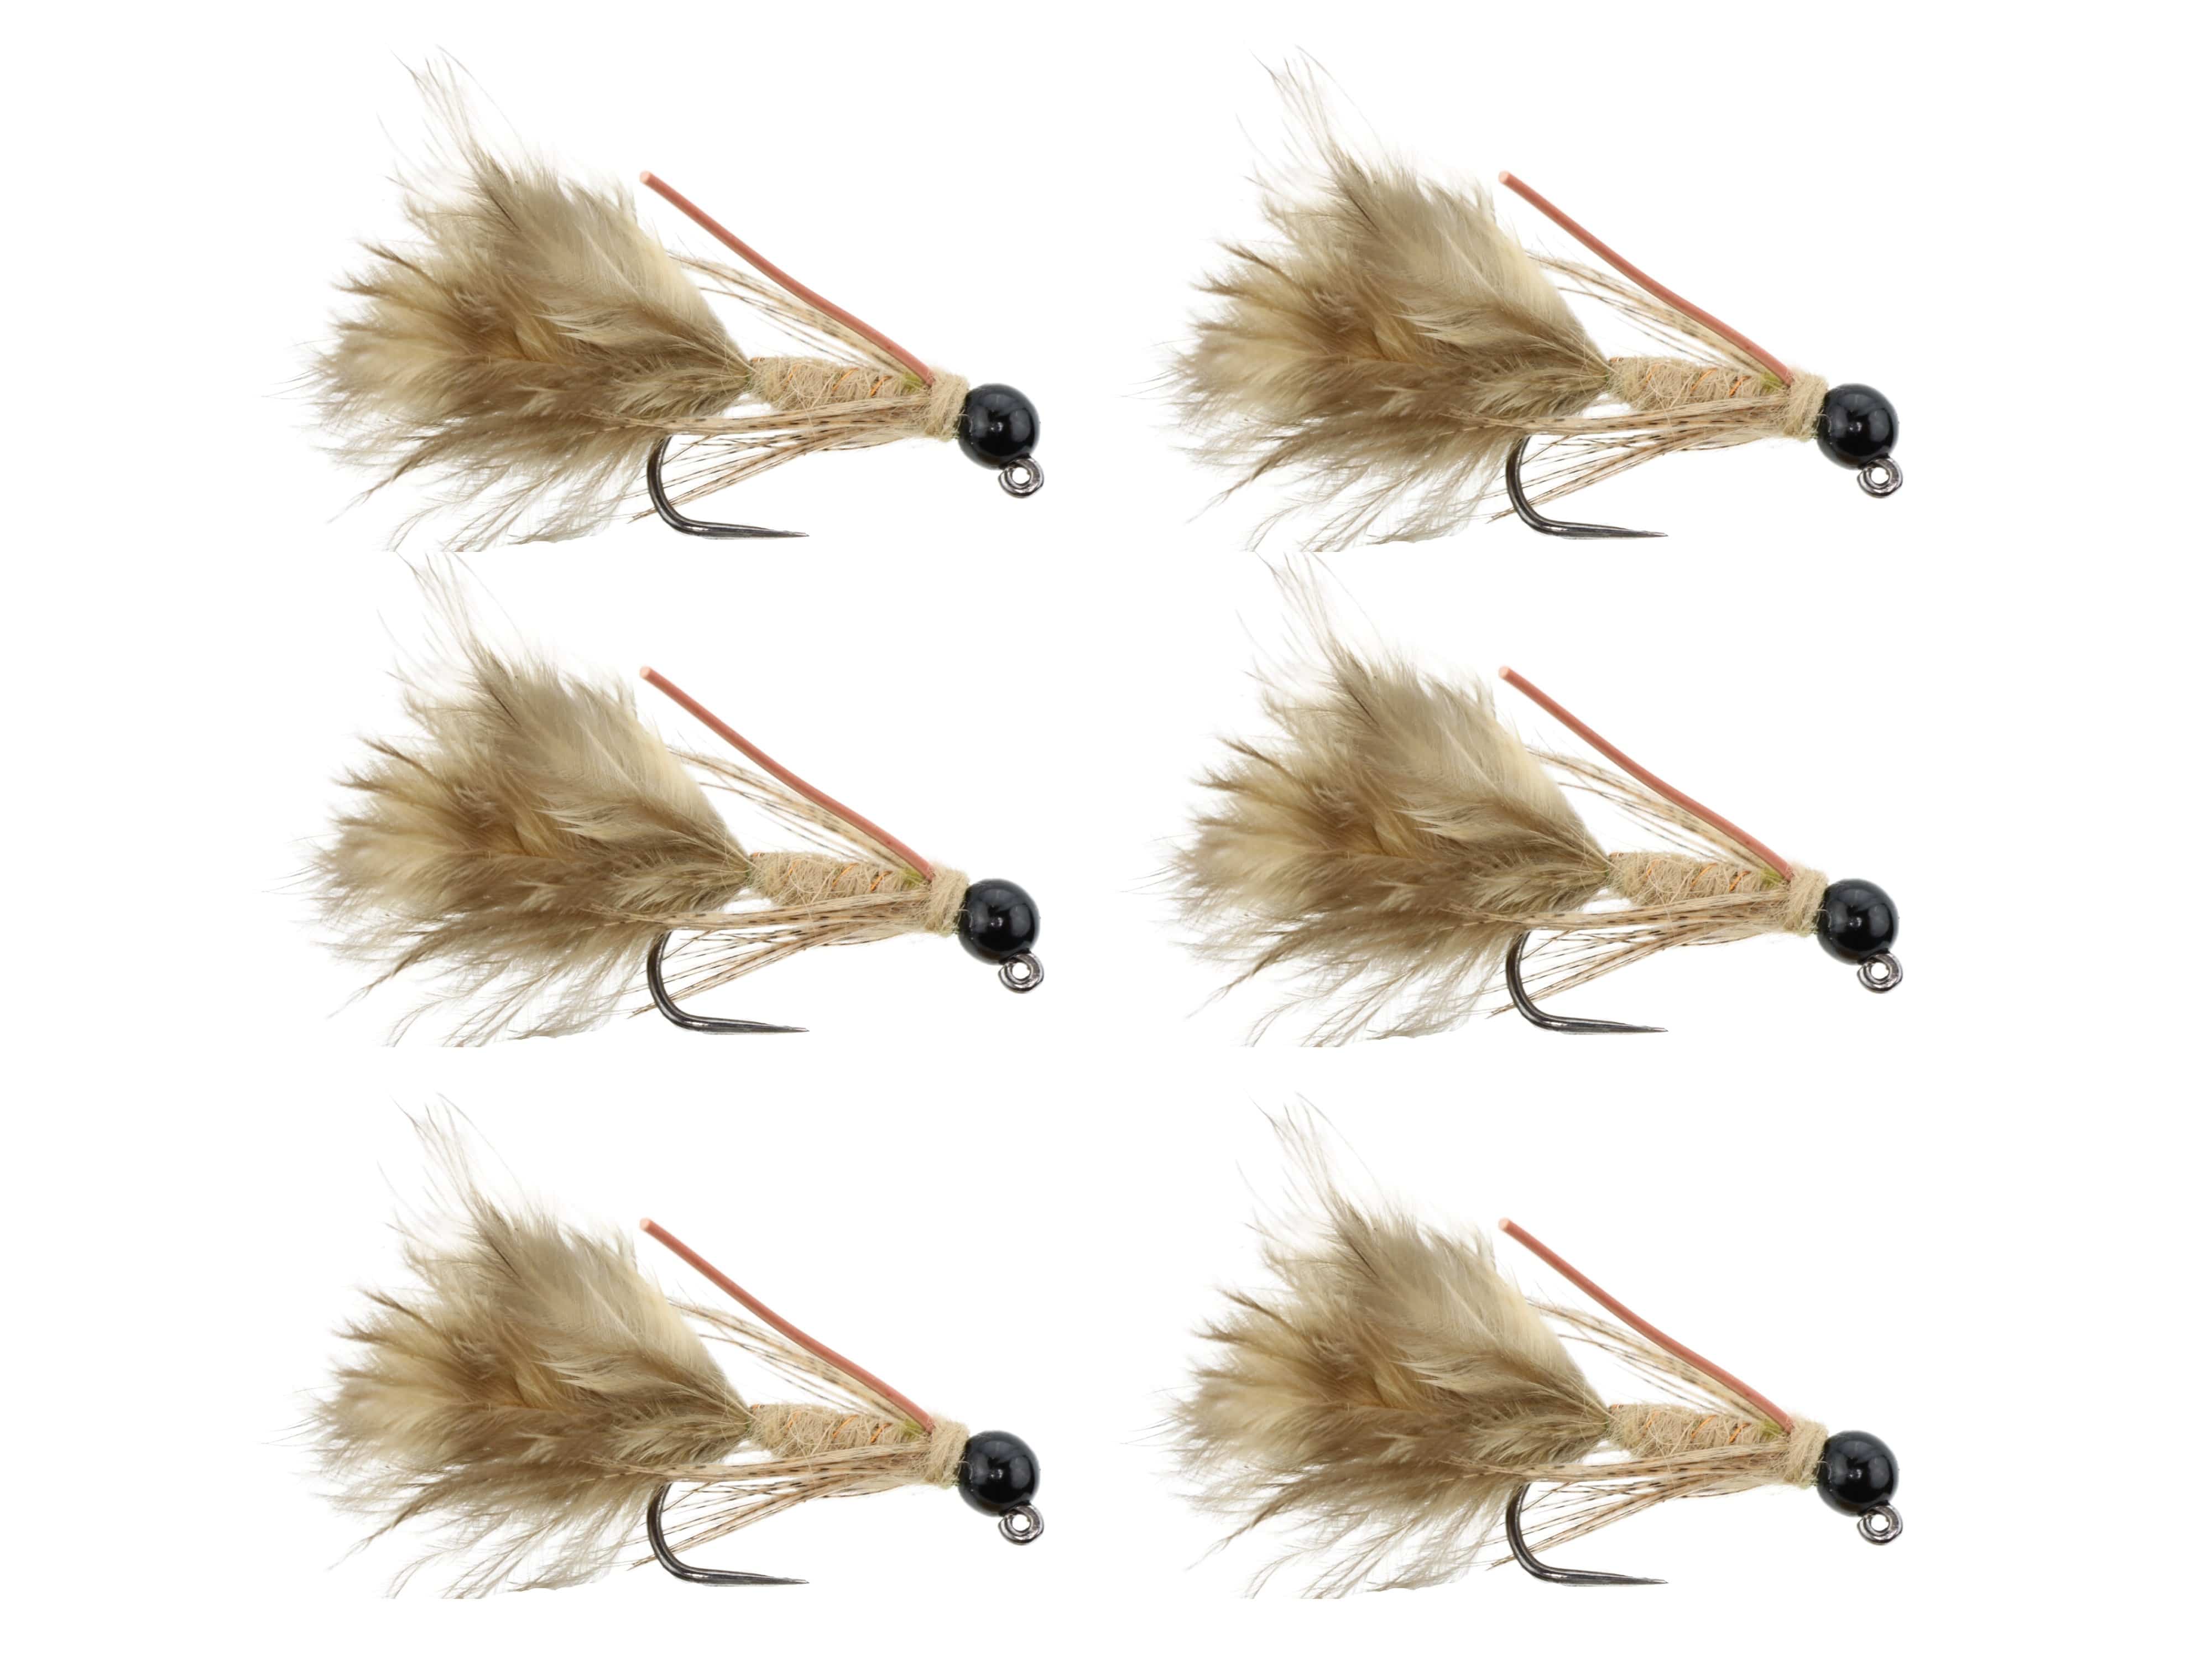 Wild Water Fly Fishing Tungsten Bead Head Tan Wooly Bugger with Rubber Legs, Size 10, Qty. 6